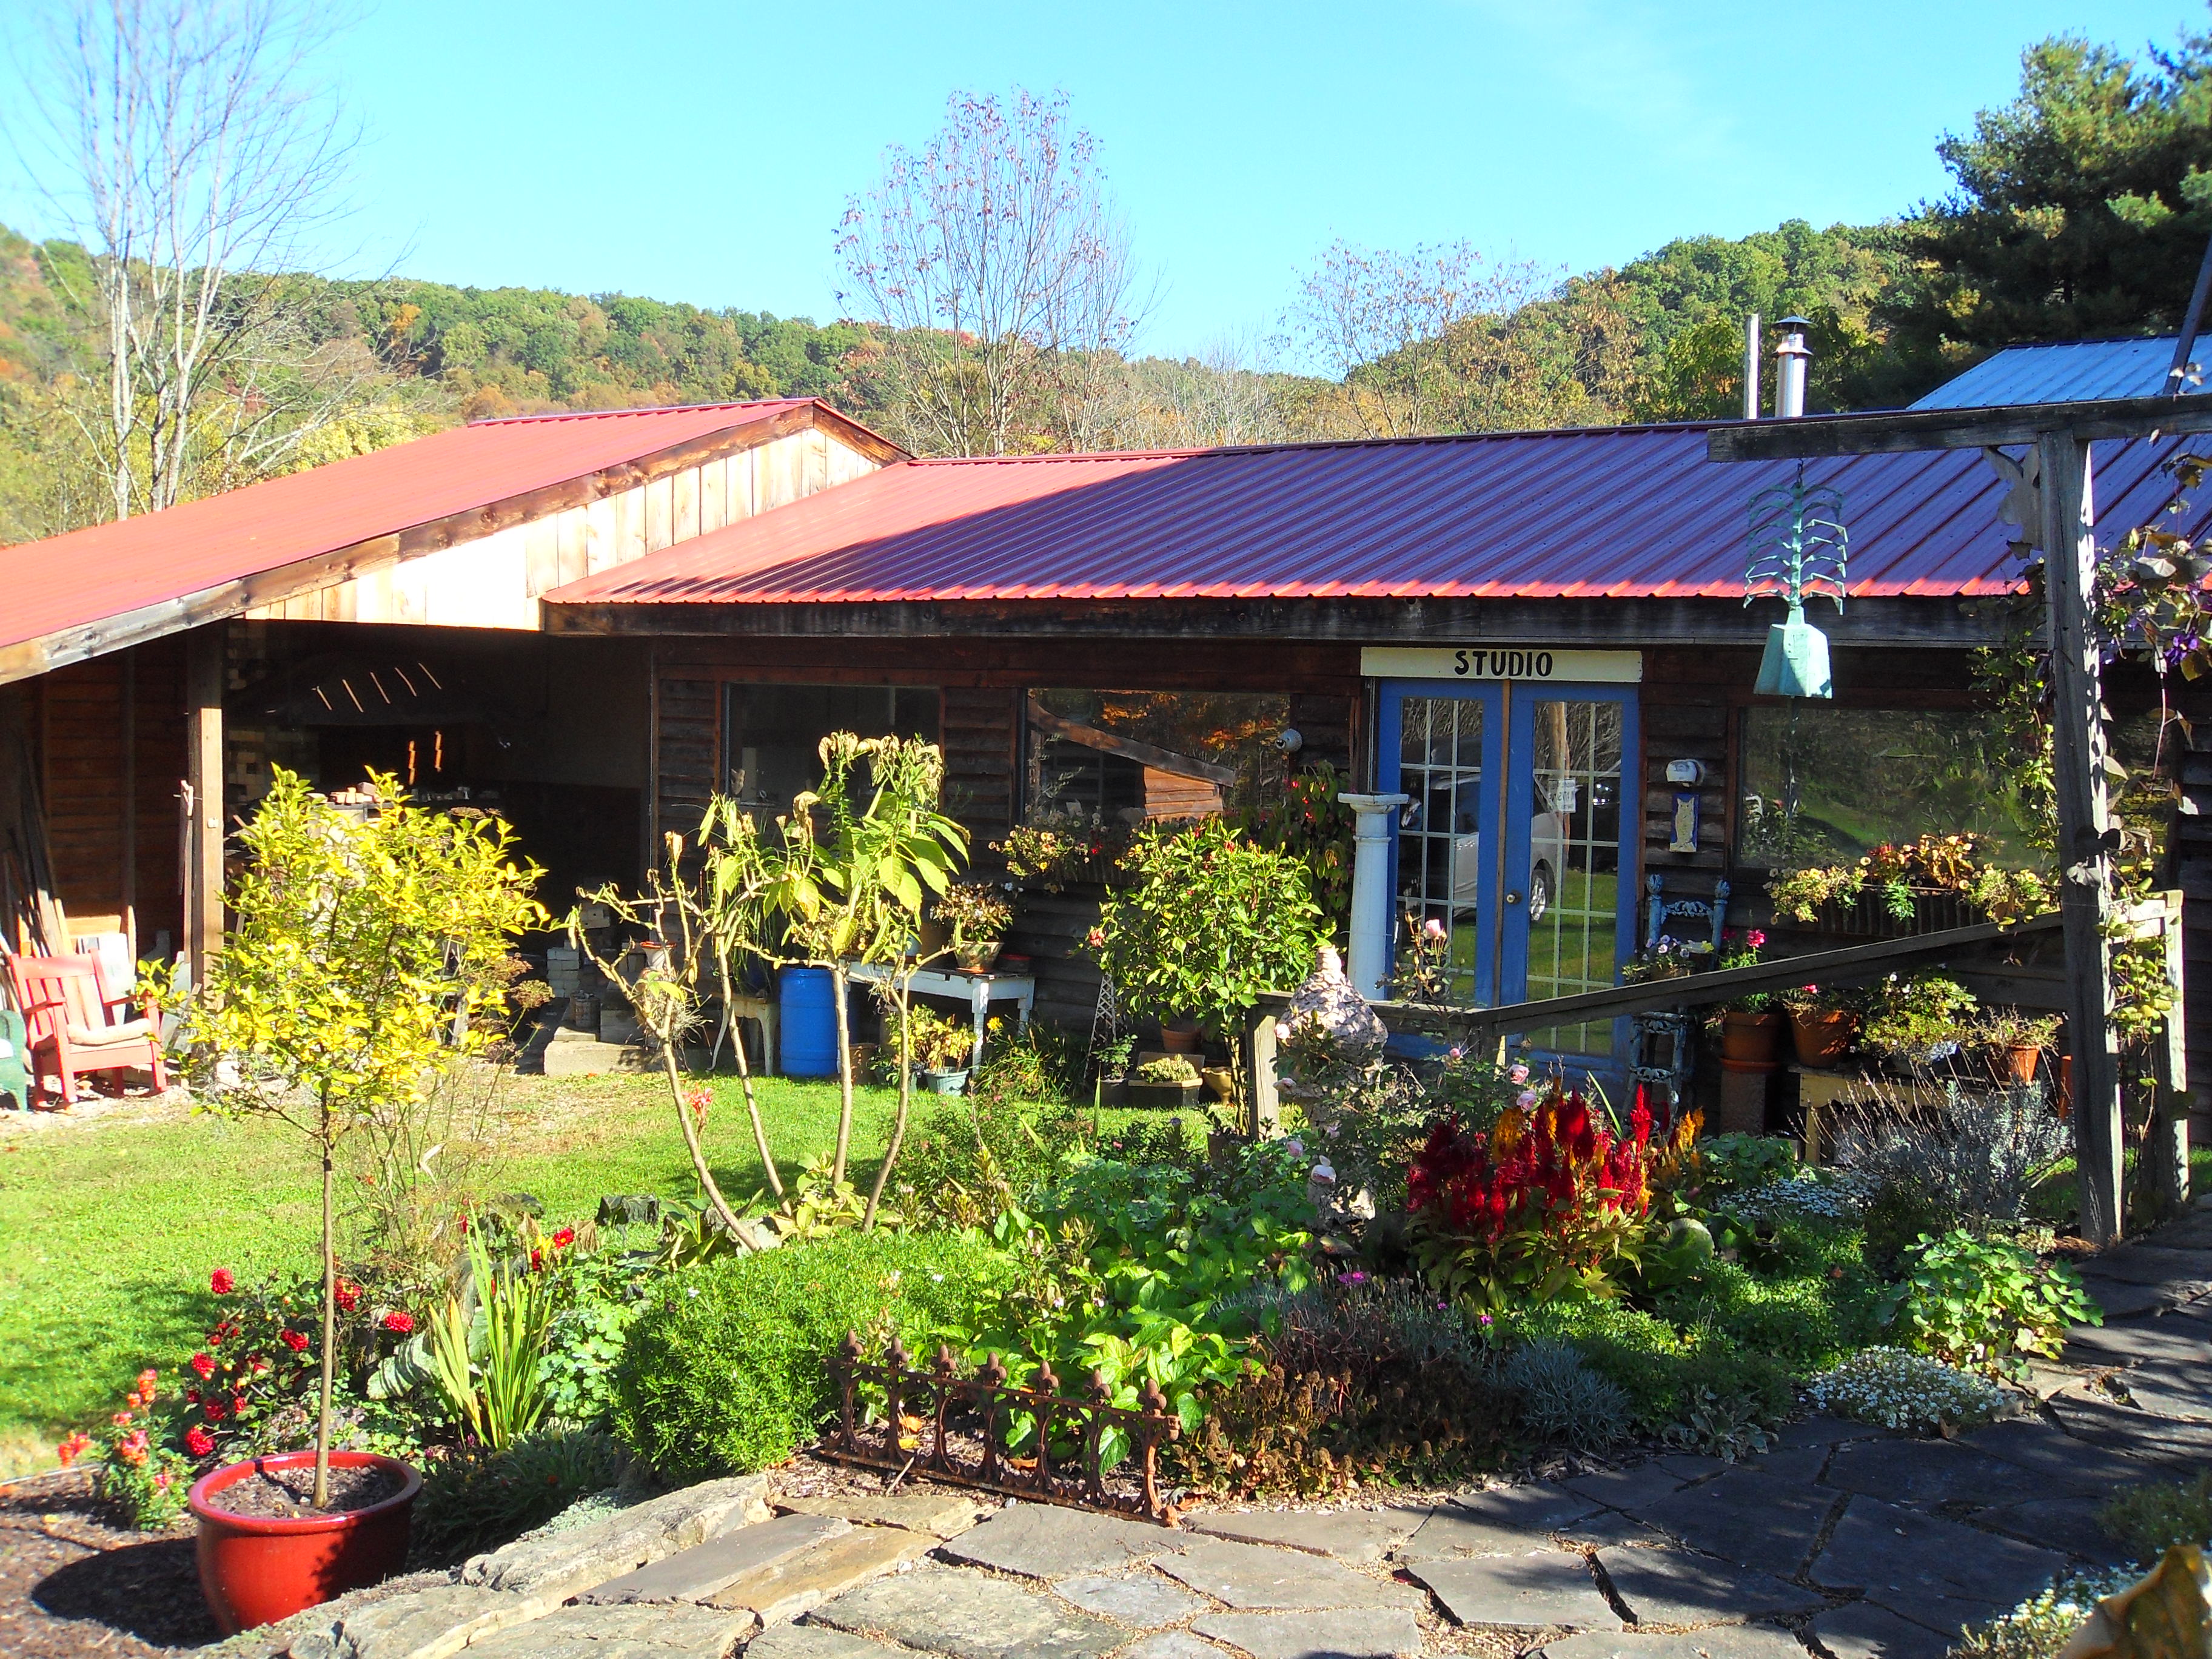 The pottery studio and garden